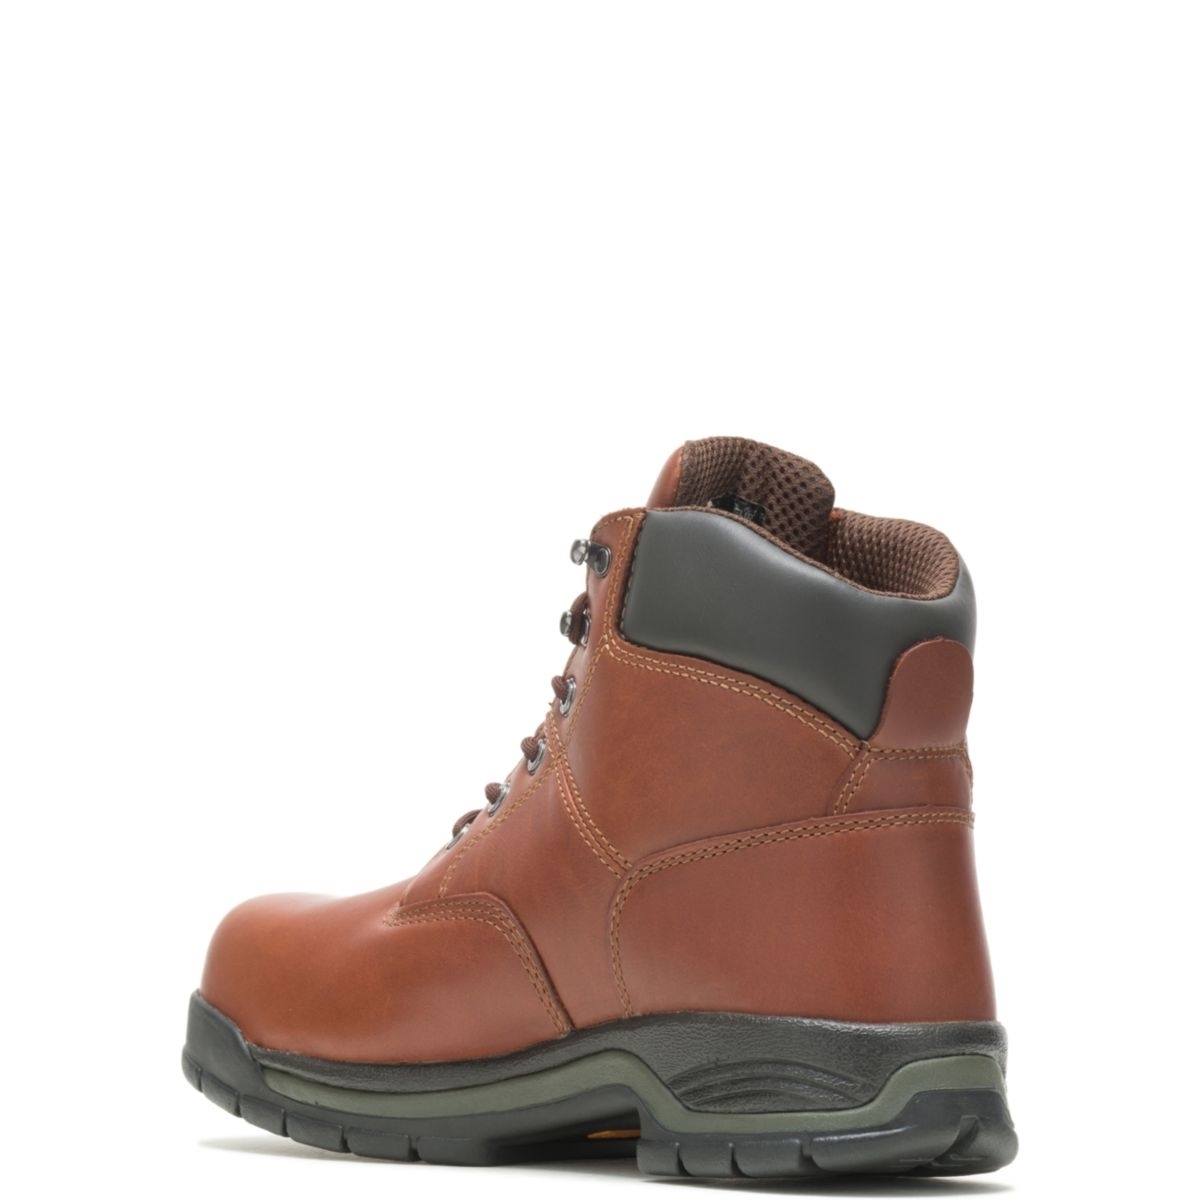 WOLVERINE Men's Harrison 6 Lace-Up SoftToe Work Boot Brown - W04906 Varies BROWN - BROWN, 9.5